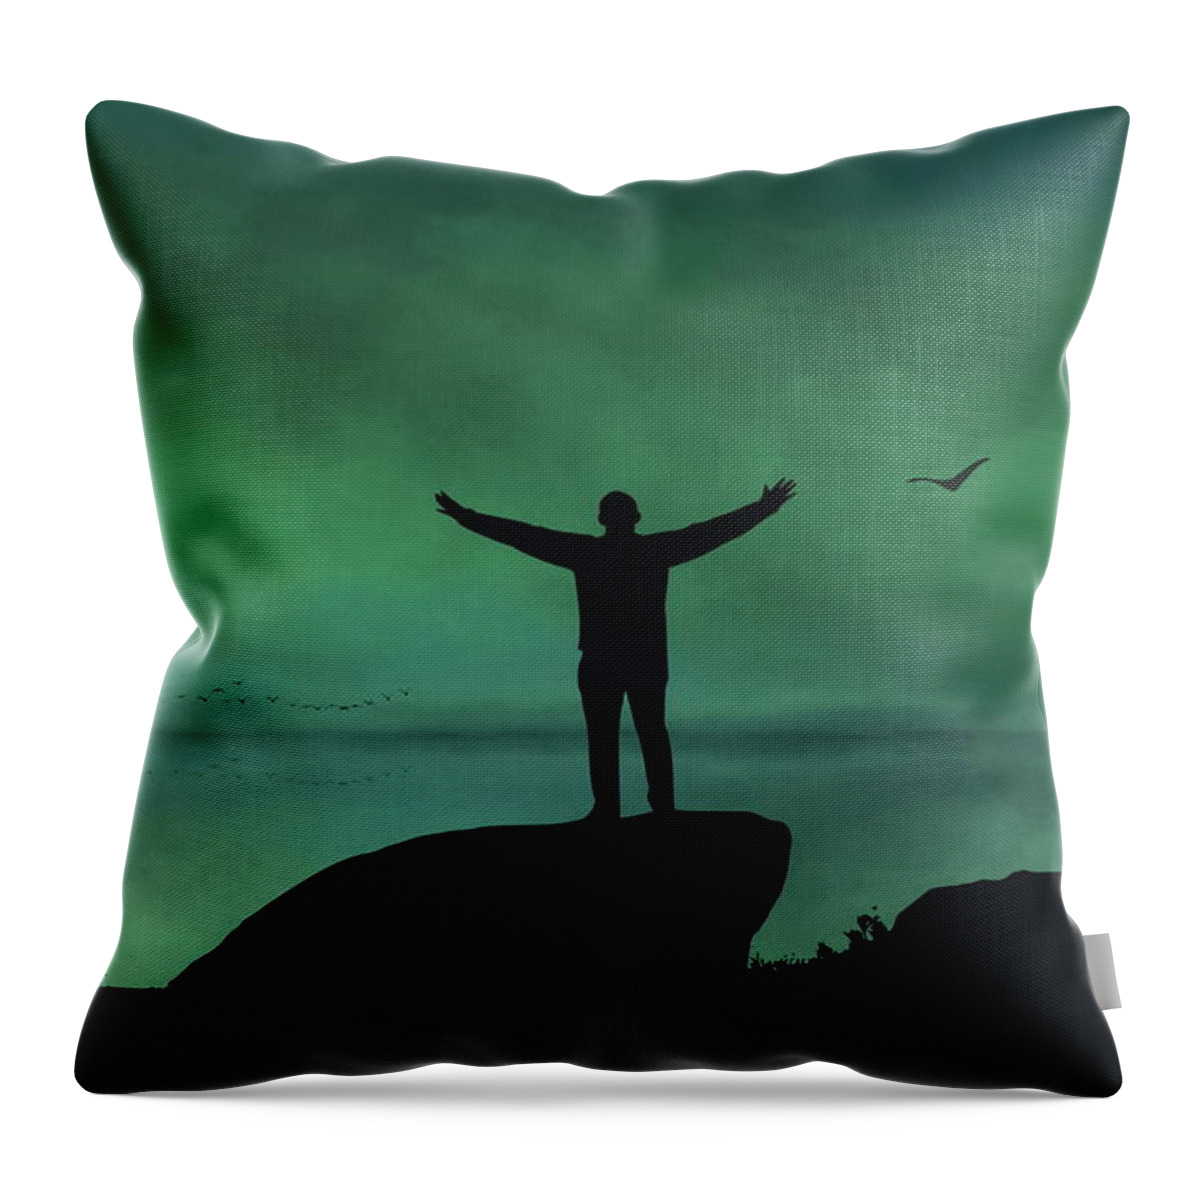 Hallelujah Throw Pillow featuring the photograph Hallelujah by Andrea Kollo